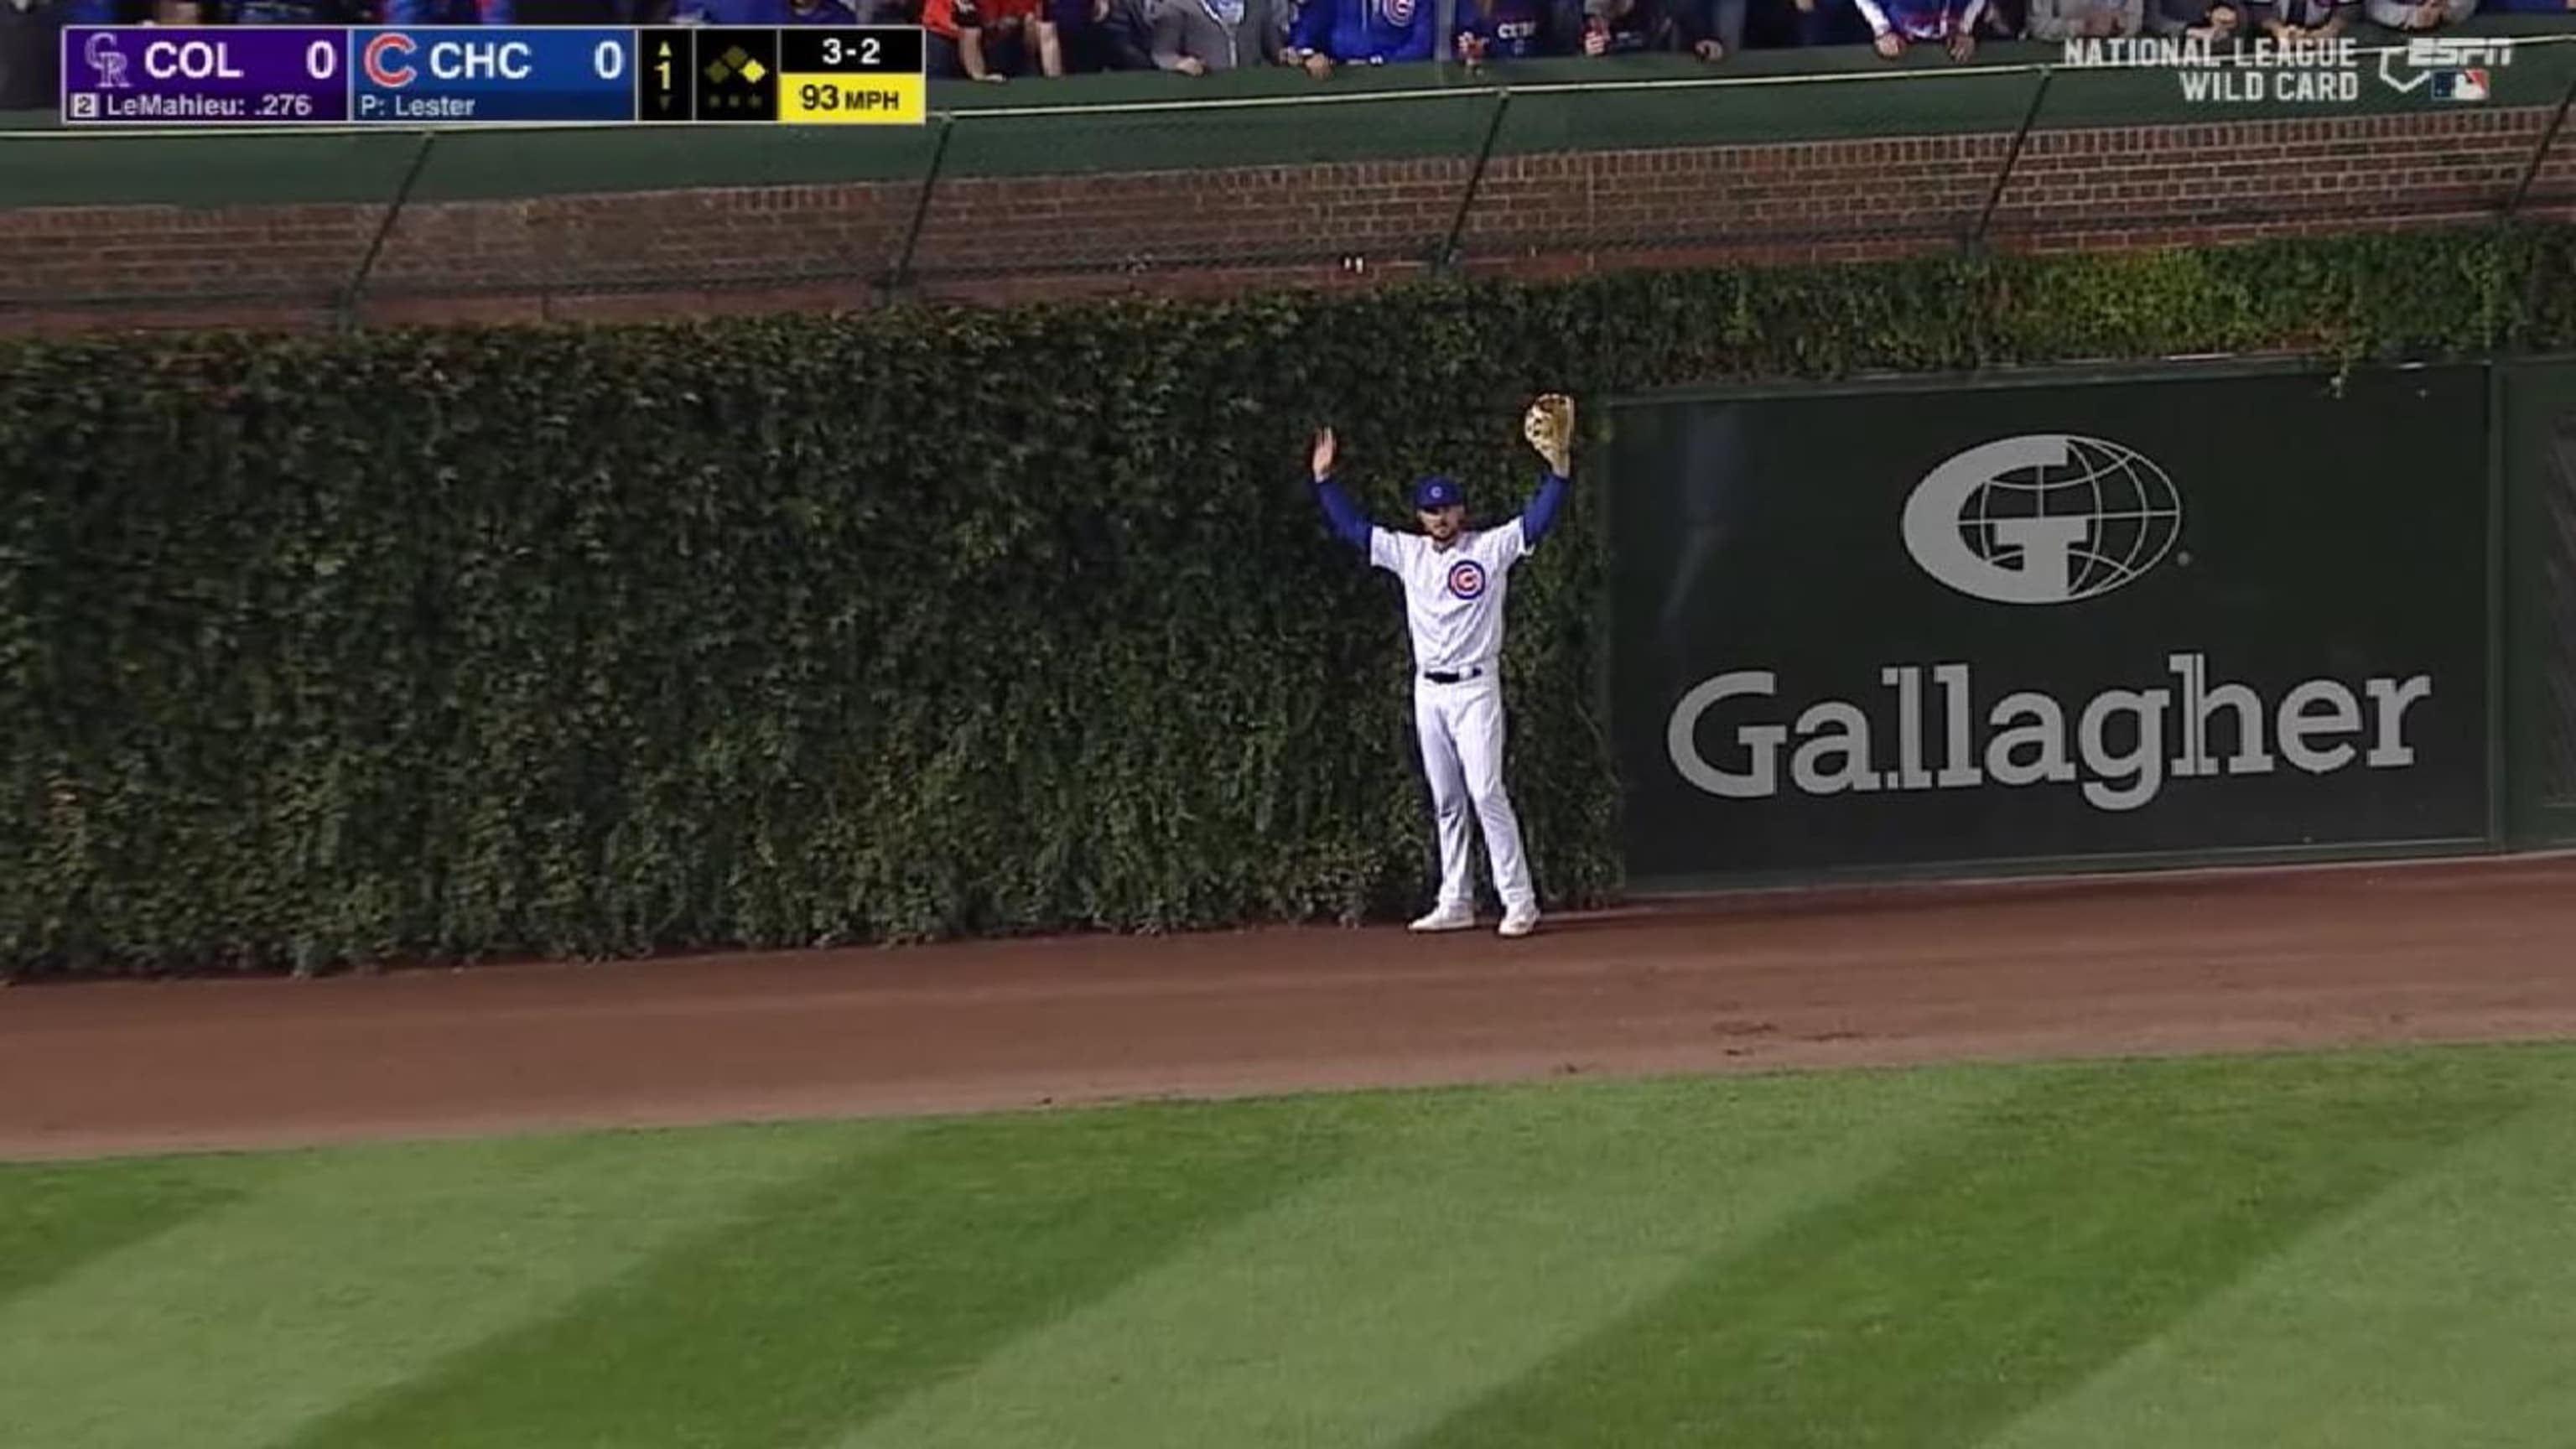 Ivy comes alive at Wrigley Field during the Cubs game - Chicago